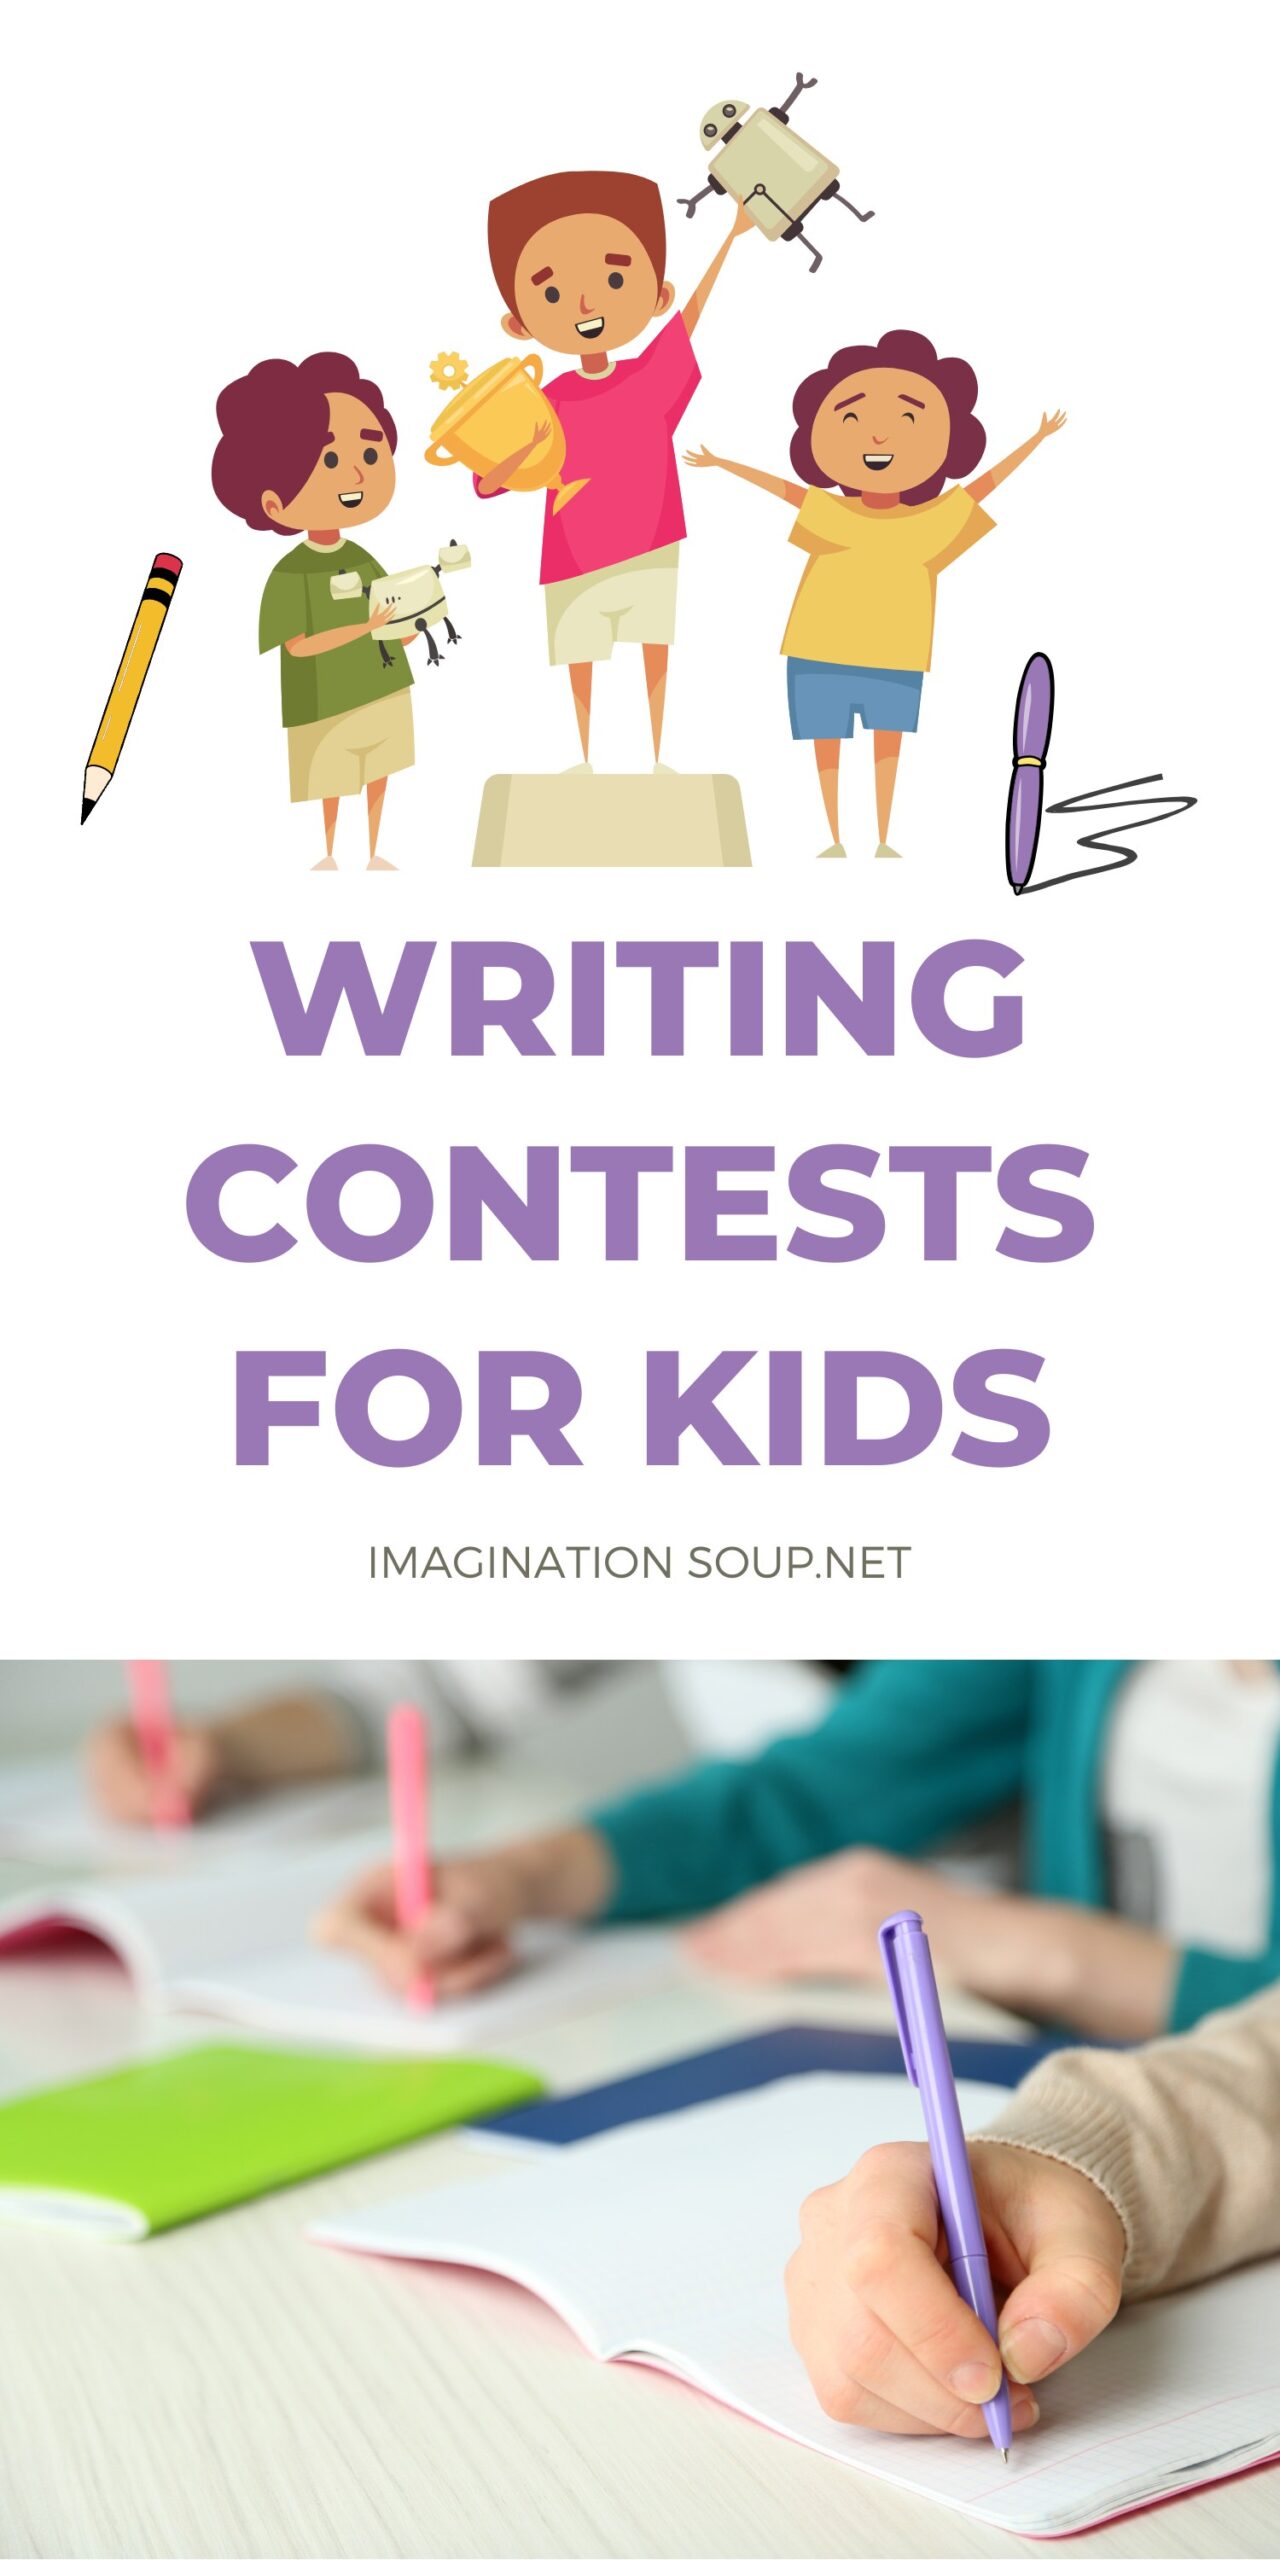 I've been searching for writing contests for kids for my daughter and her friend. Many kids, like mine, want to write for an audience; they'd love to be published. This round-up of writing contests for kids and other opportunities might help give emerging writers their first chance at publication.